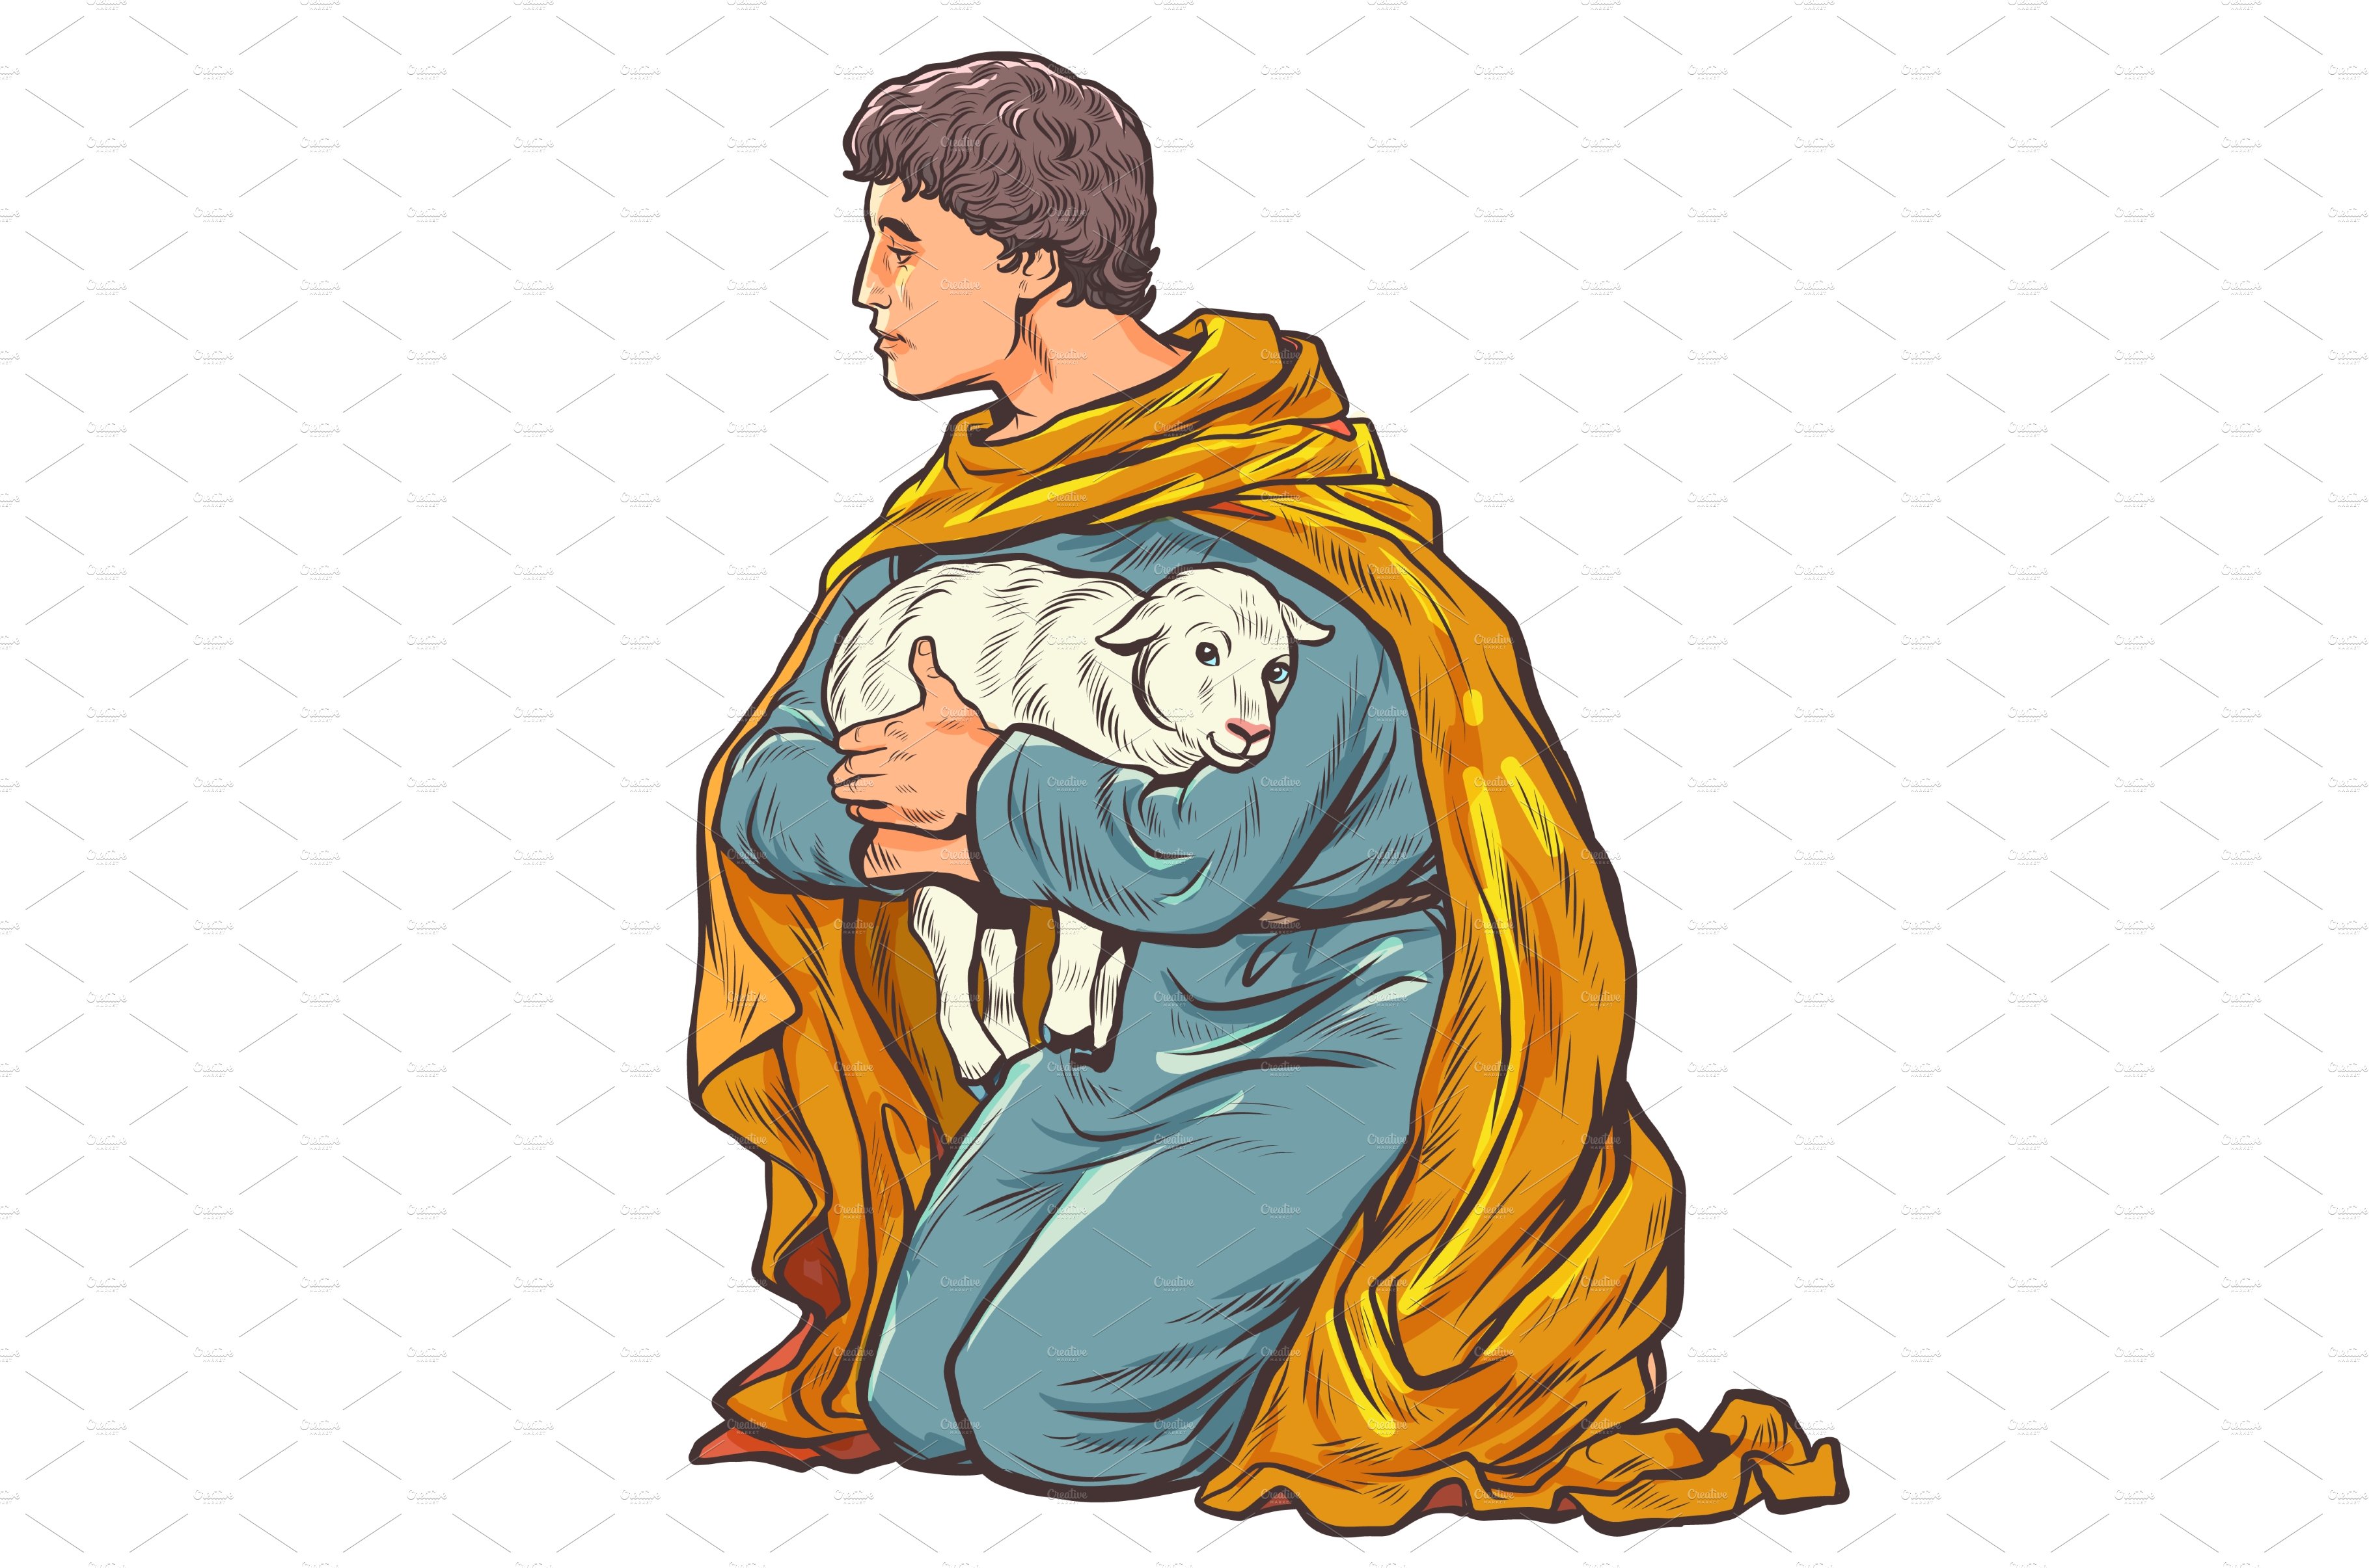 shepherd with a lamb, a biblical cover image.